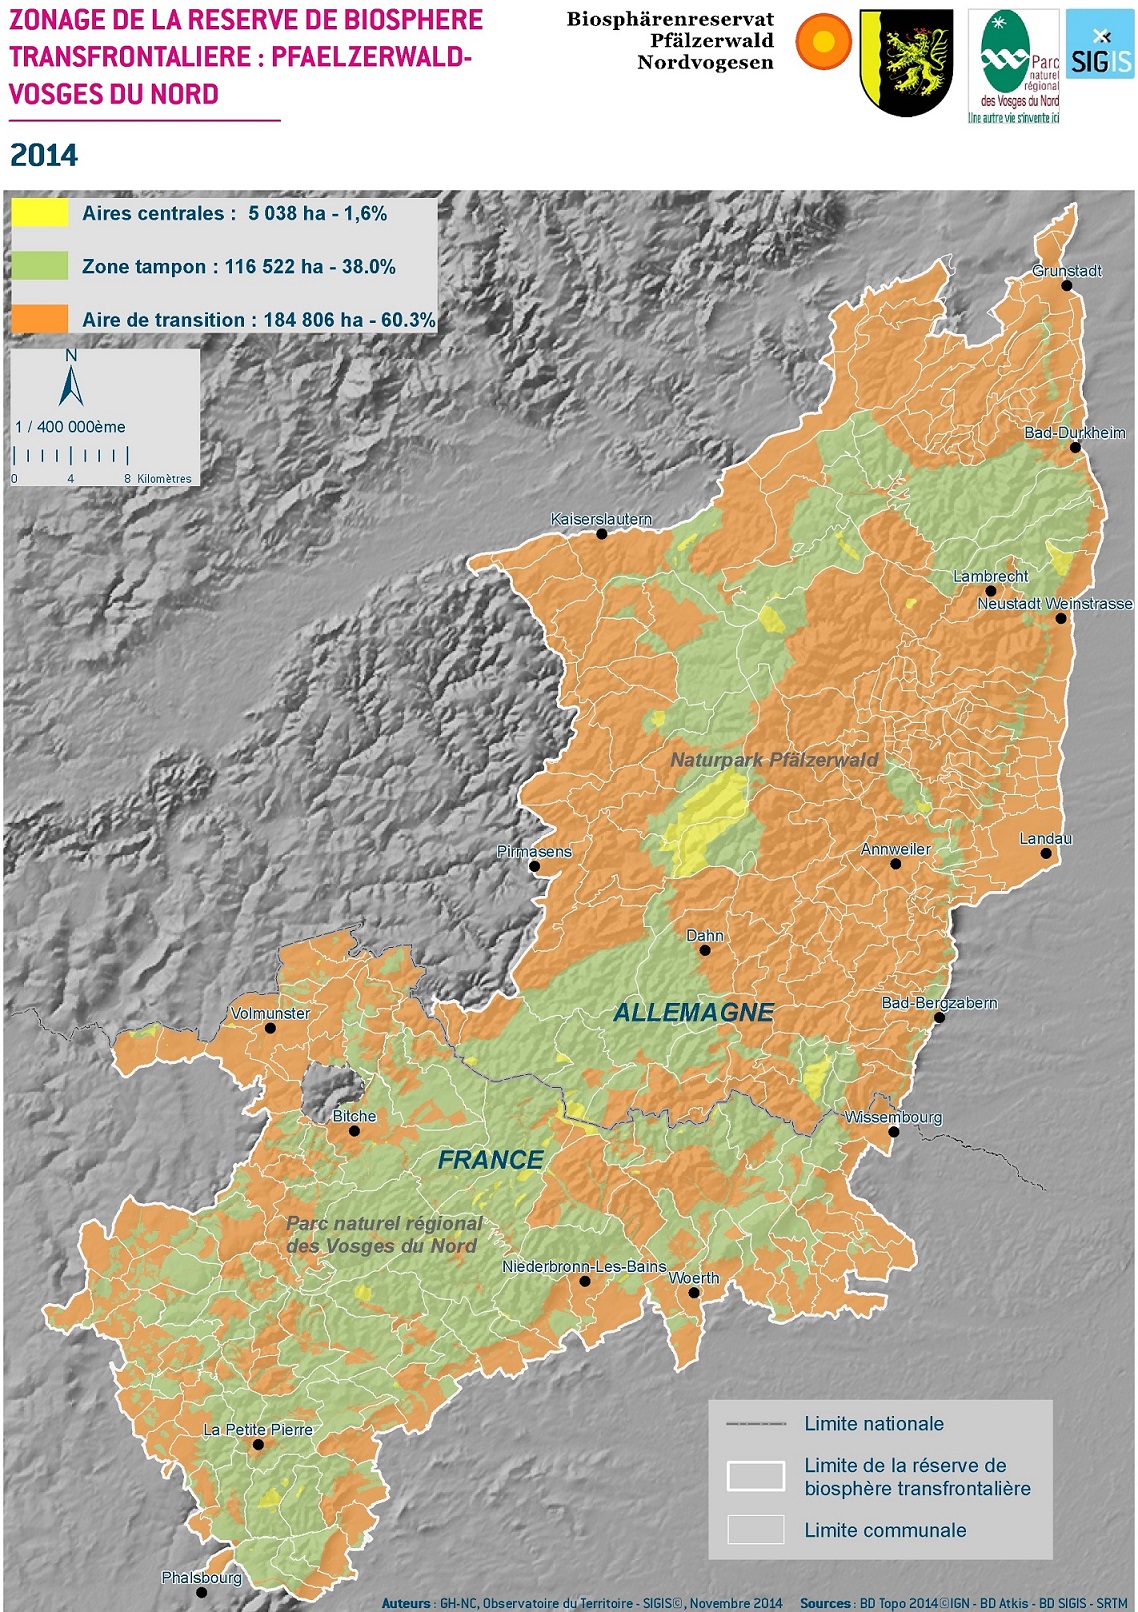 Map of the Vosges du Nord - Pfälzerwald biosphere © GH-NC - licence [CC BY-SA 4.0] from Wikimedia Commons